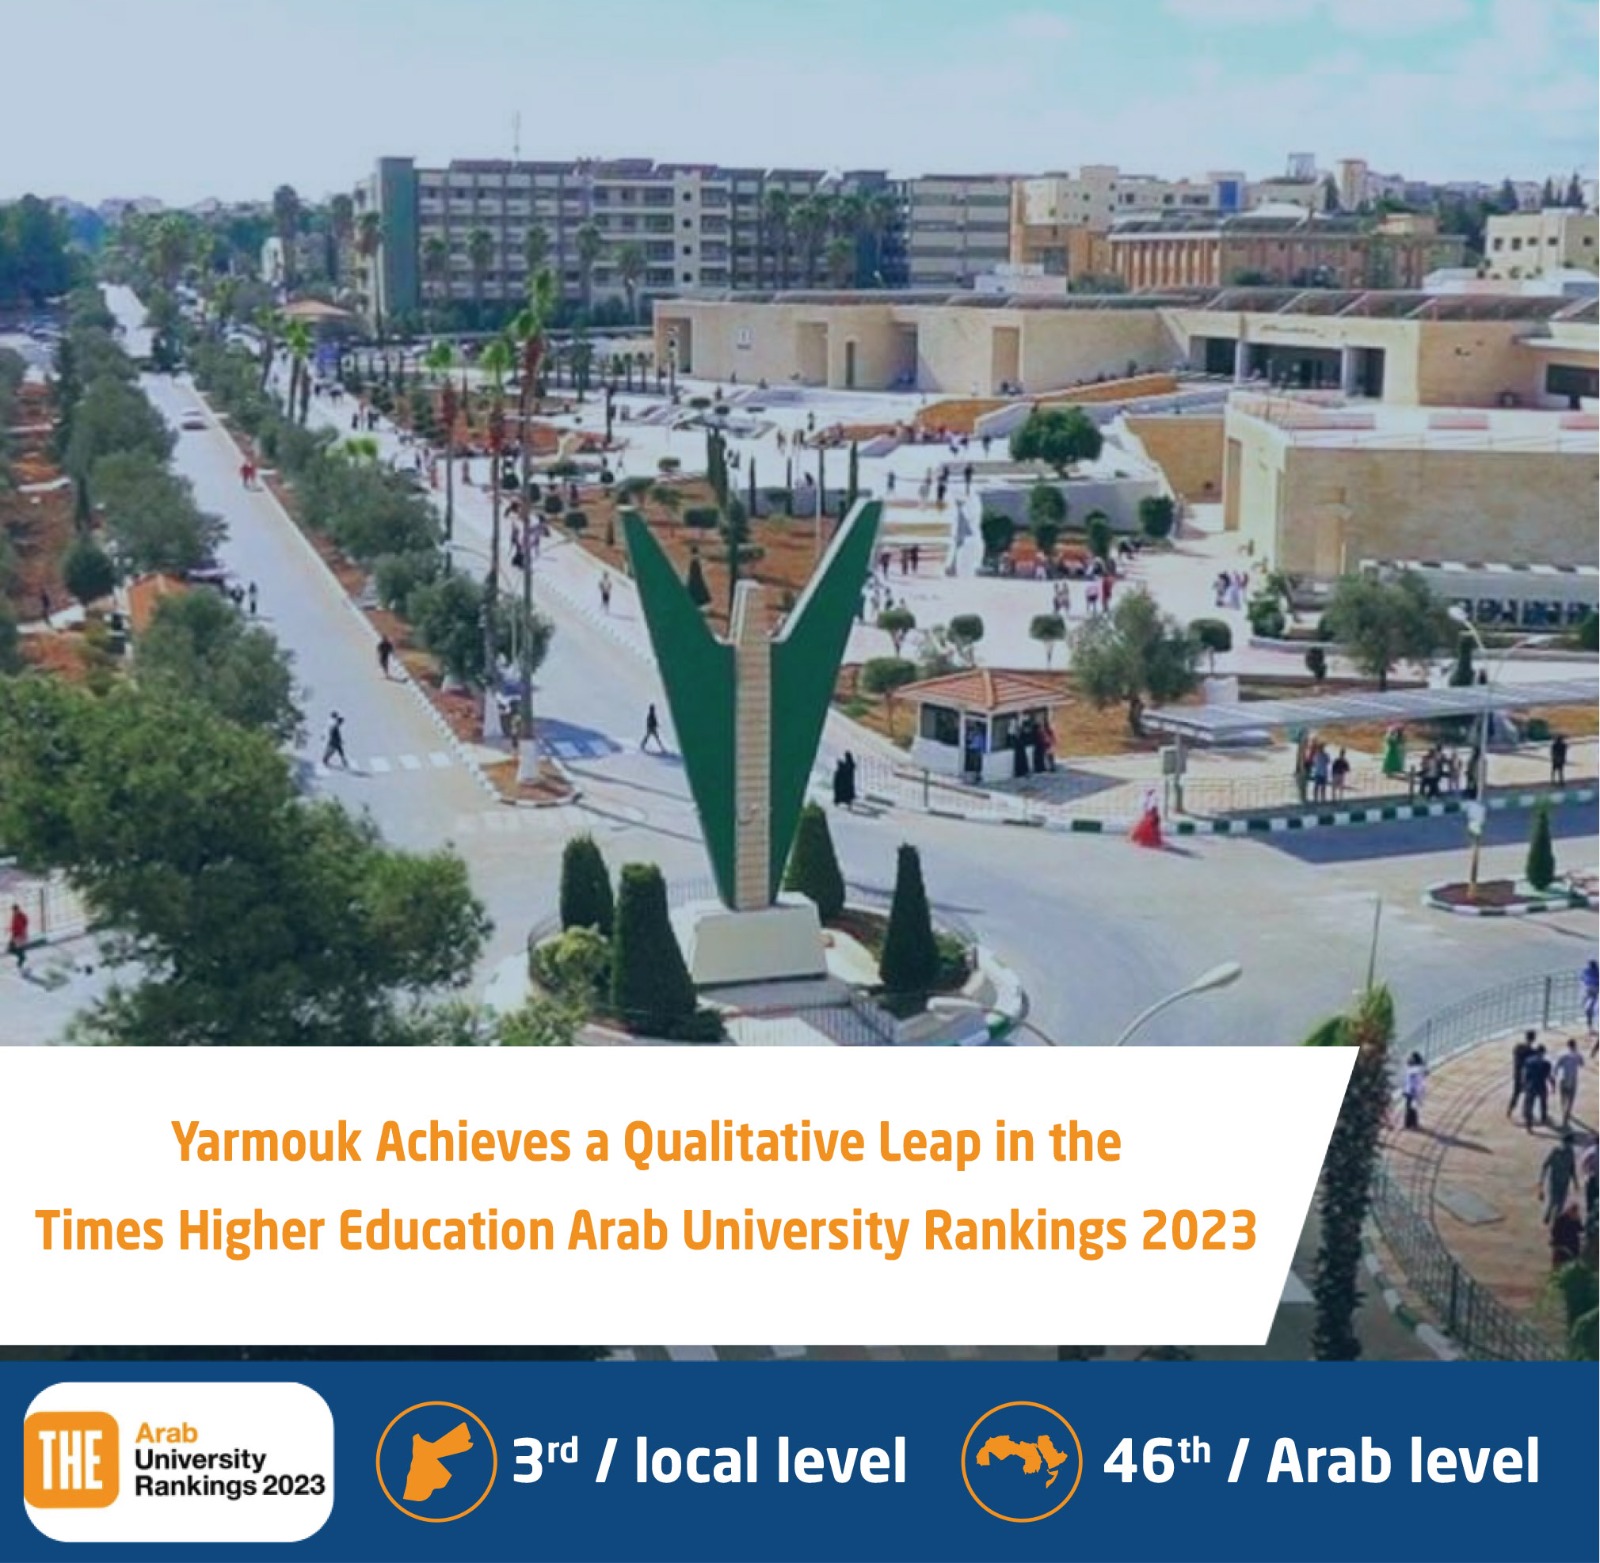 Yarmouk Achieves a Qualitative Leap in the Times Higher Education Ranking of Arab Universities 2023